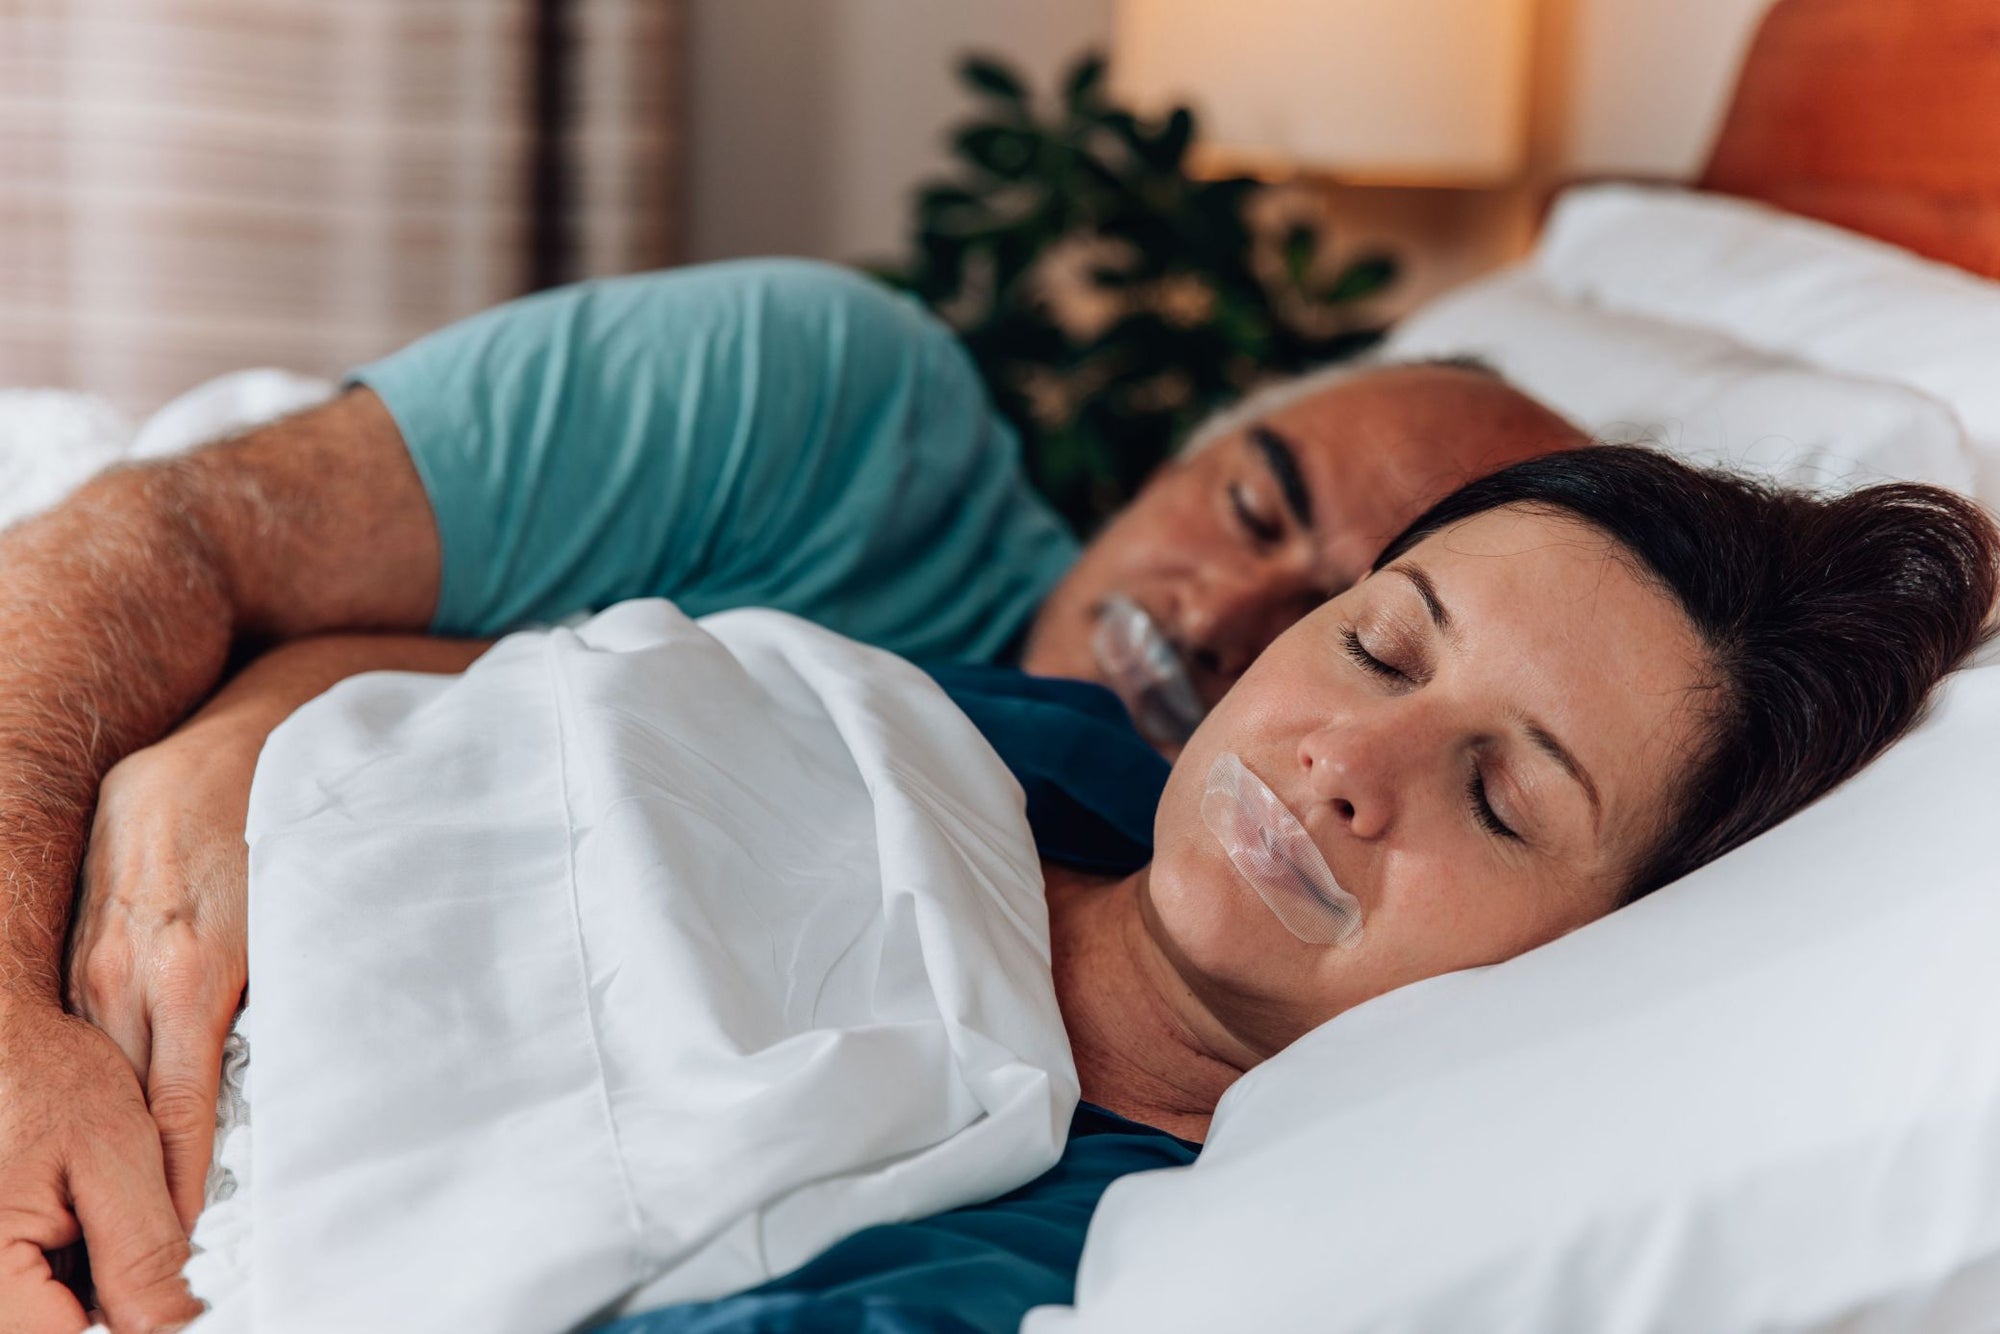 Nose Breathing Benefits: 5 Reasons why Nose Breathing is Better When you Sleep